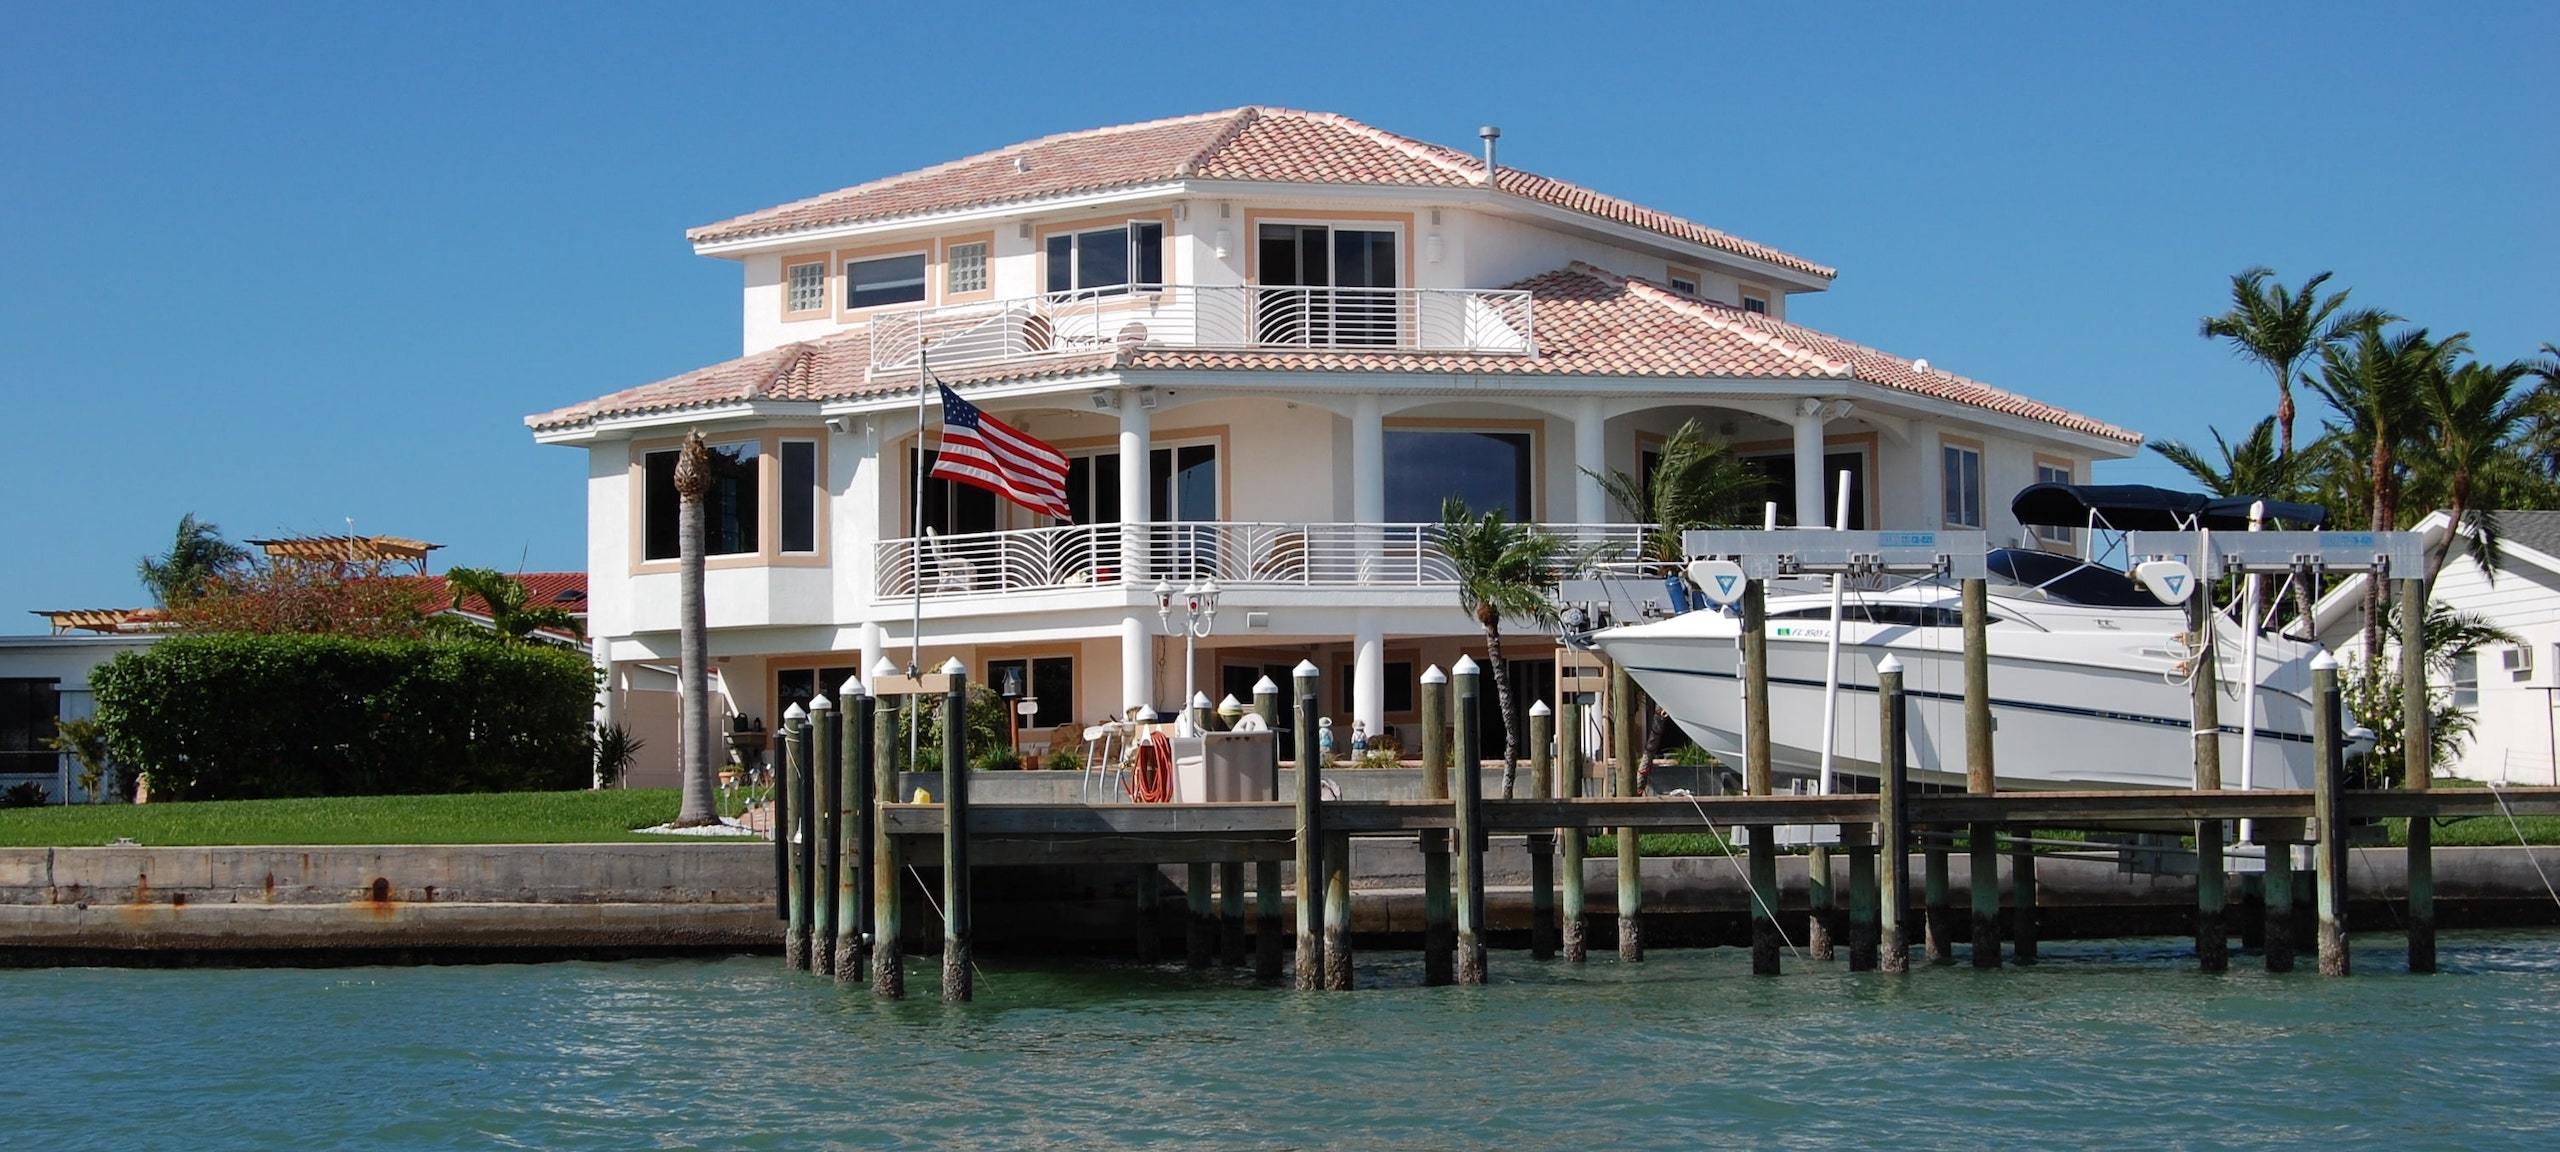 Luxury Florida lakeside home with a boat docked.